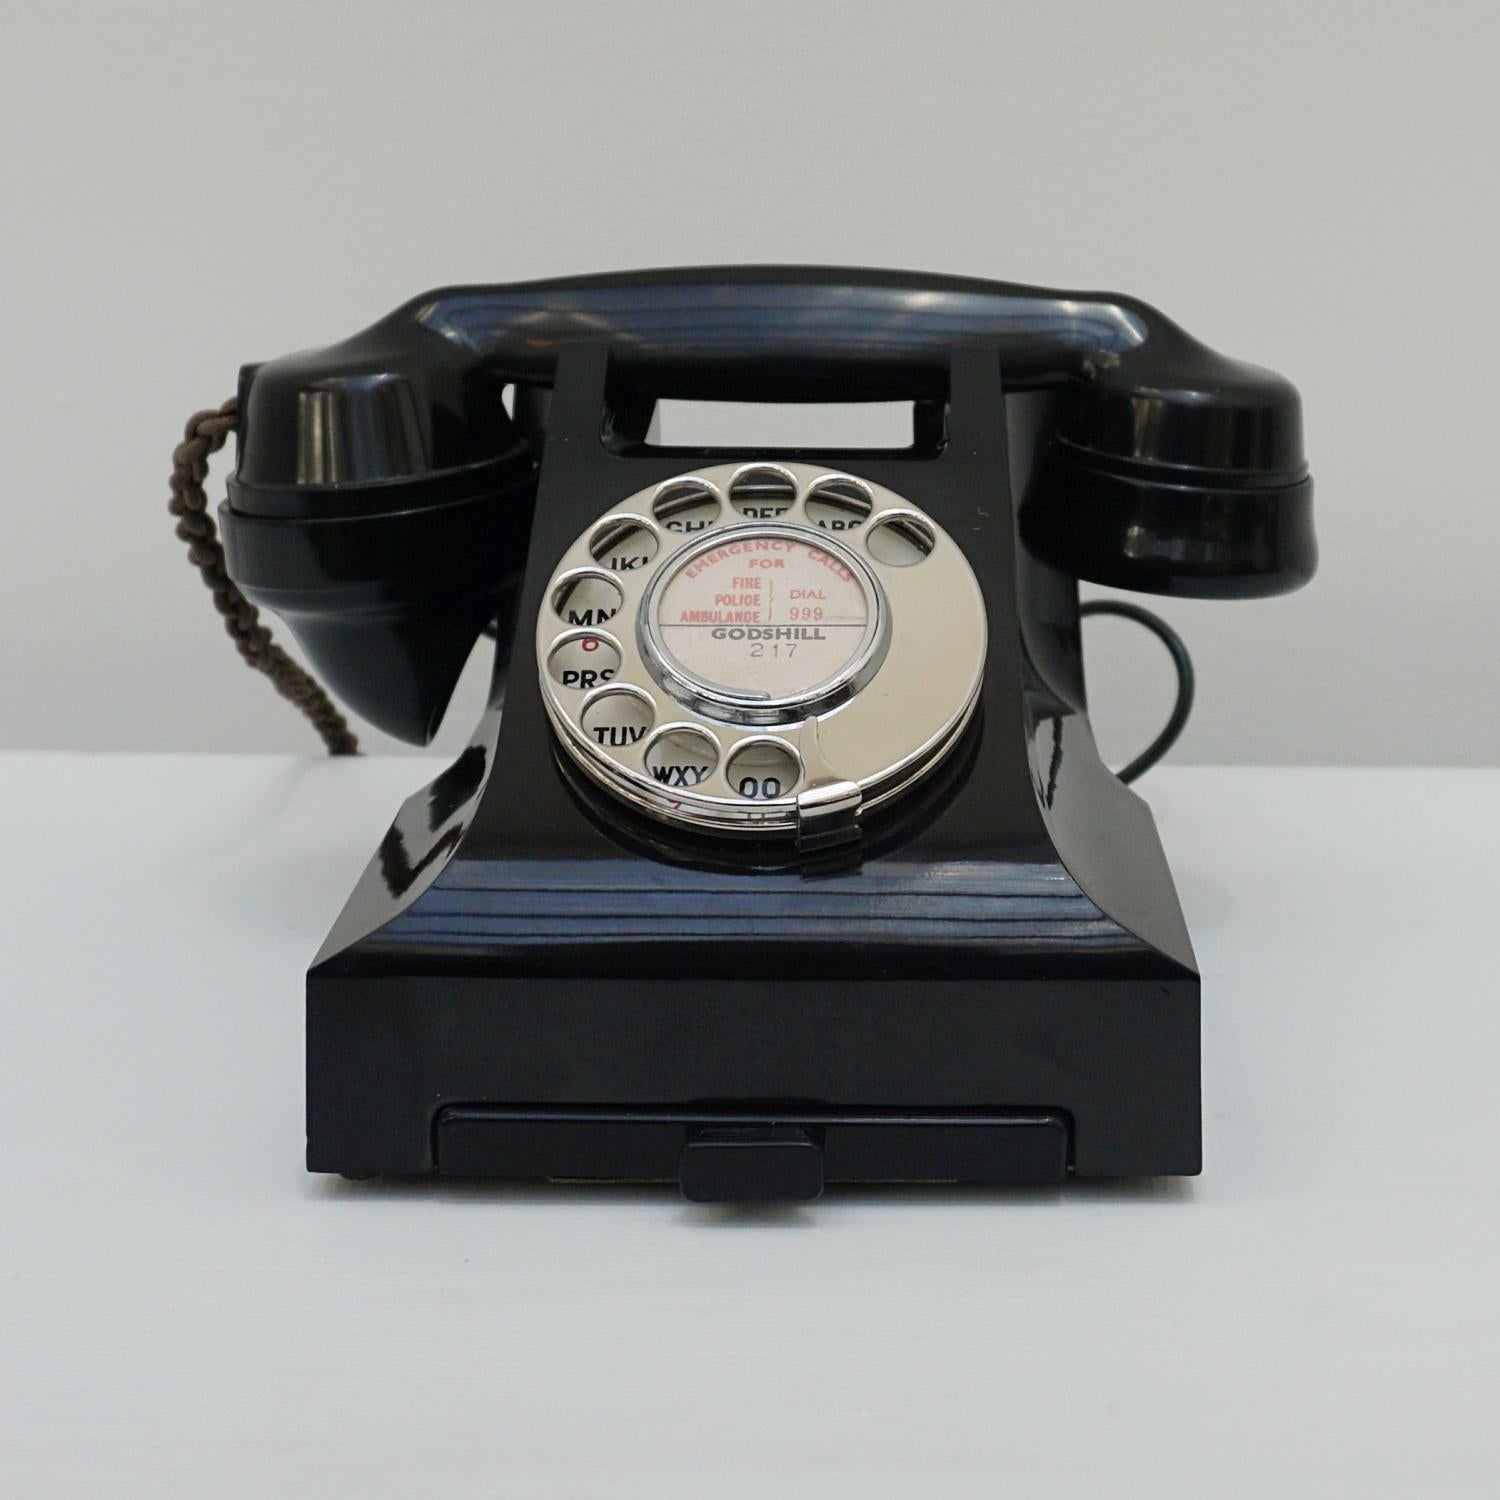 An original GPO model 332L Telephone. Black bakelite with integral drawer and braided handset cord. Registered number to face.

Dimensions: H 15cm, W 20cm, D 16cm

Origin: English

Date: Circa 1950

Item No: G1703228

All of our telephones